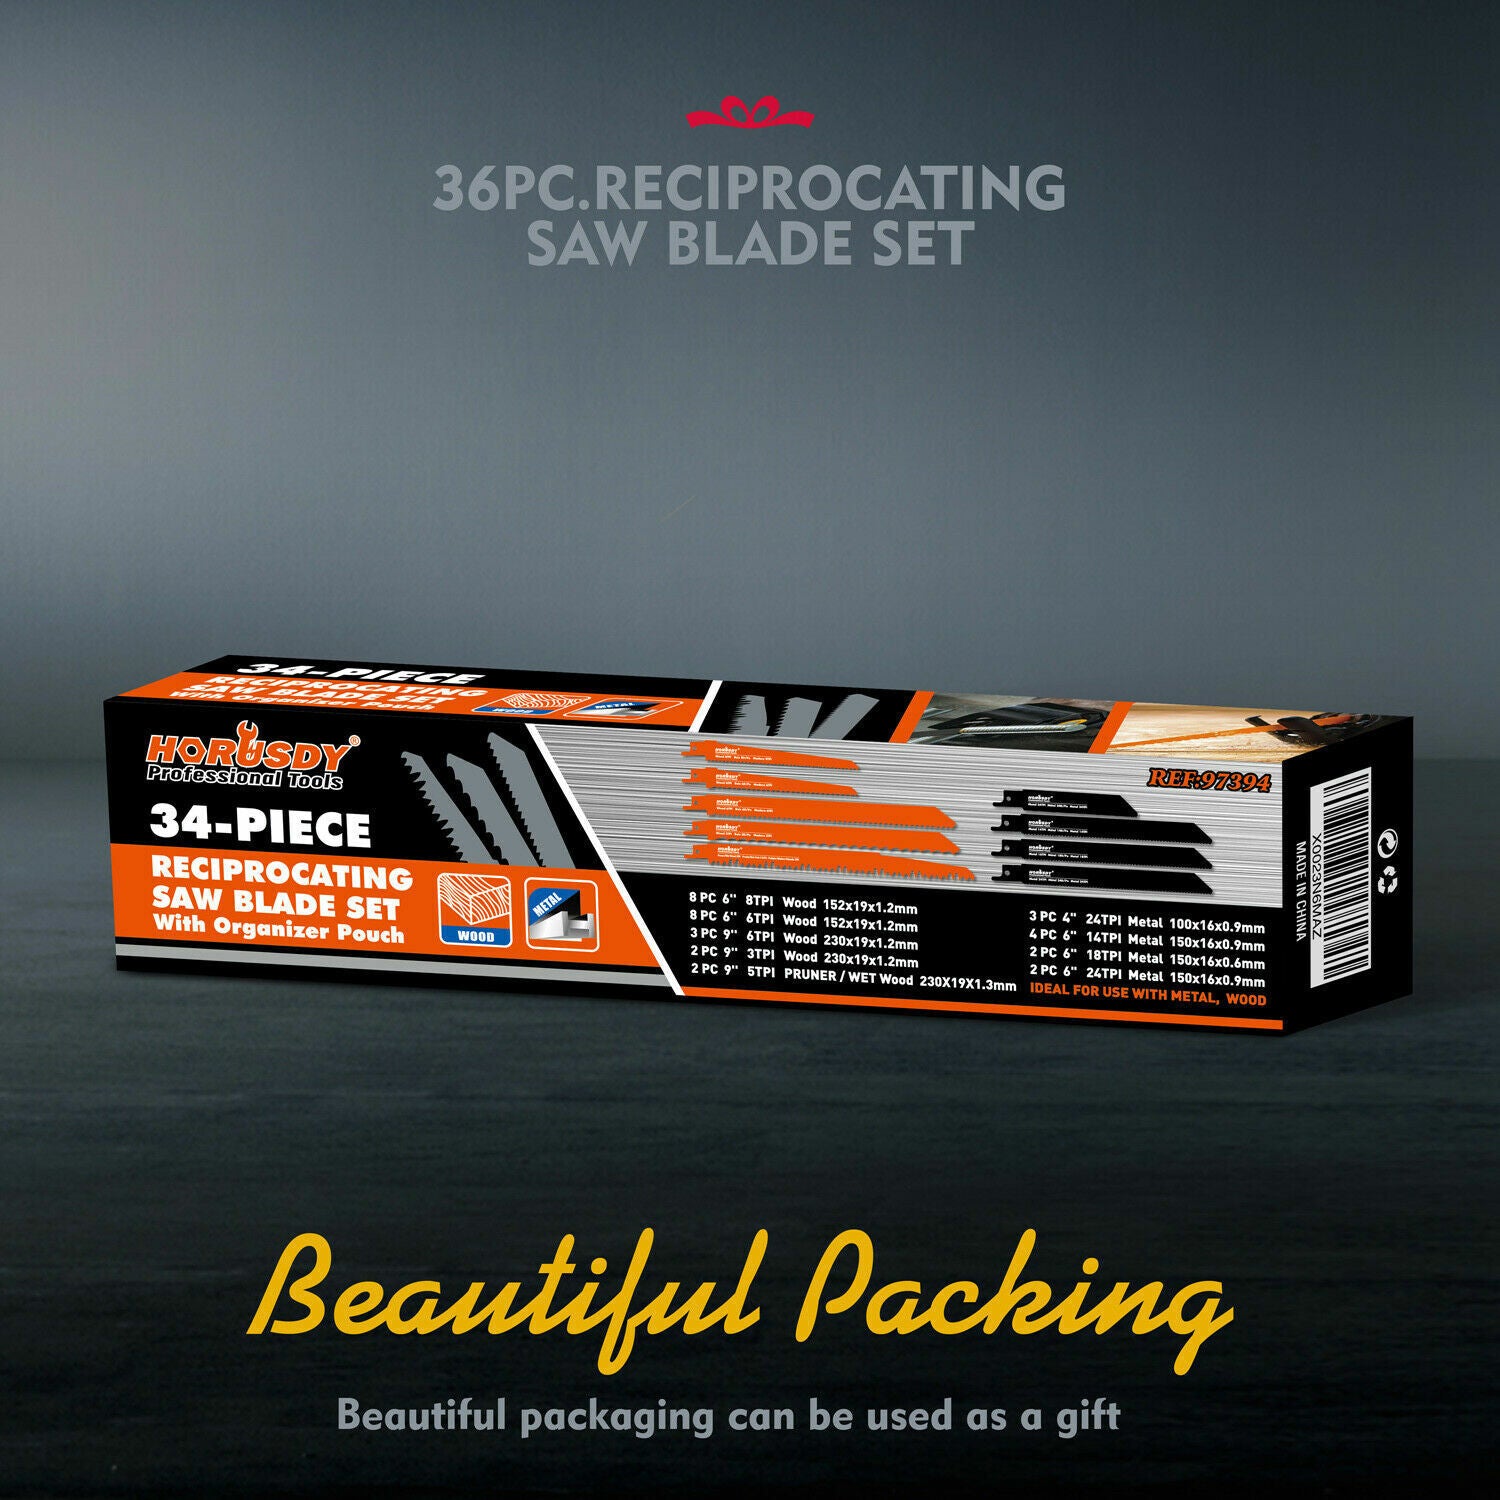 34-Piece Reciprocating Saw Blade Set for Wood and Metal Cutting, compatible with major brands.